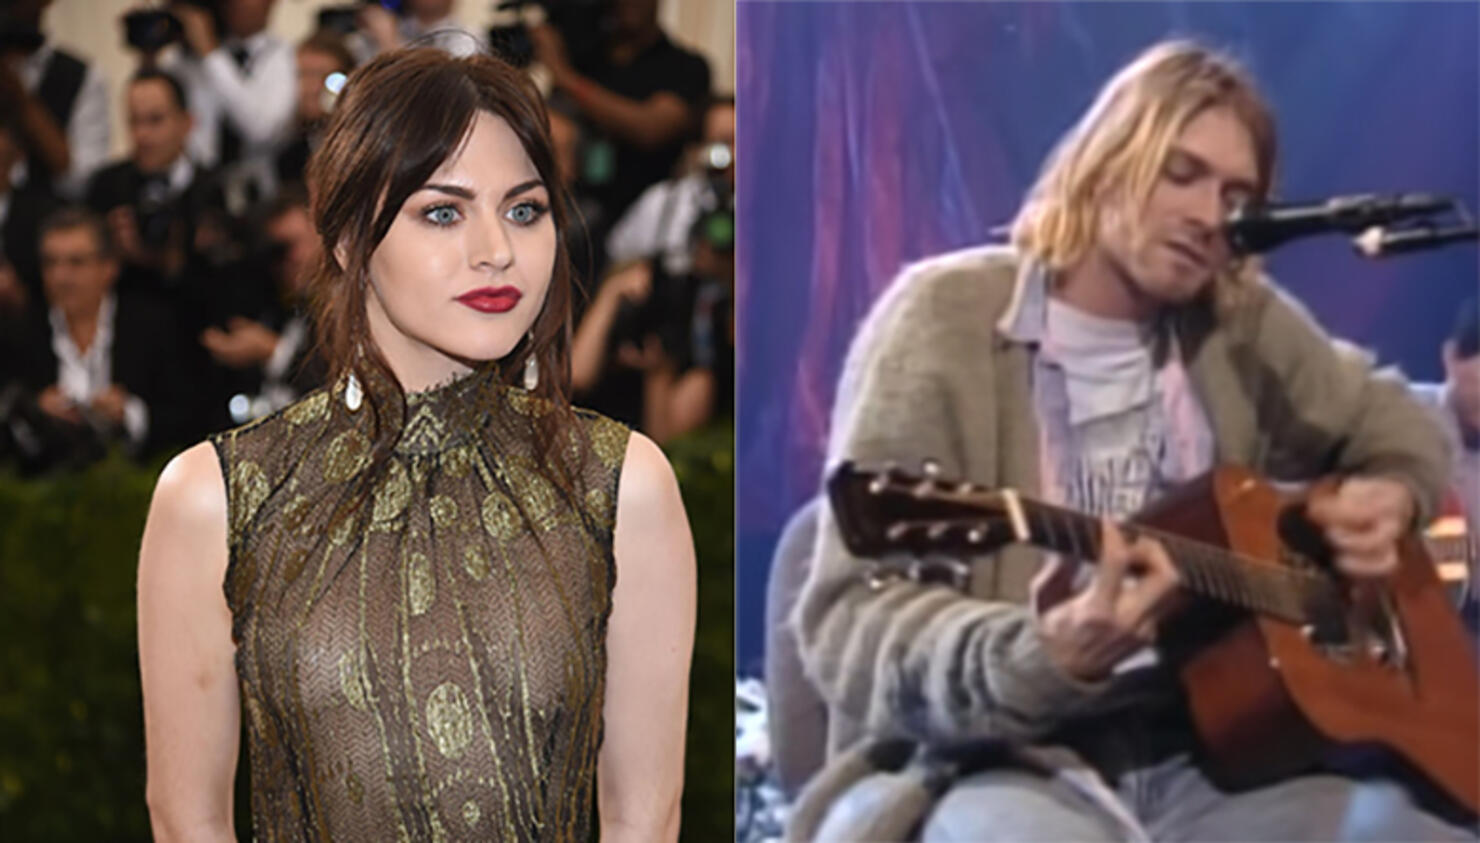 Kurt Cobain's 'MTV Unplugged' Guitar Goes to Daughters Ex in Divorce